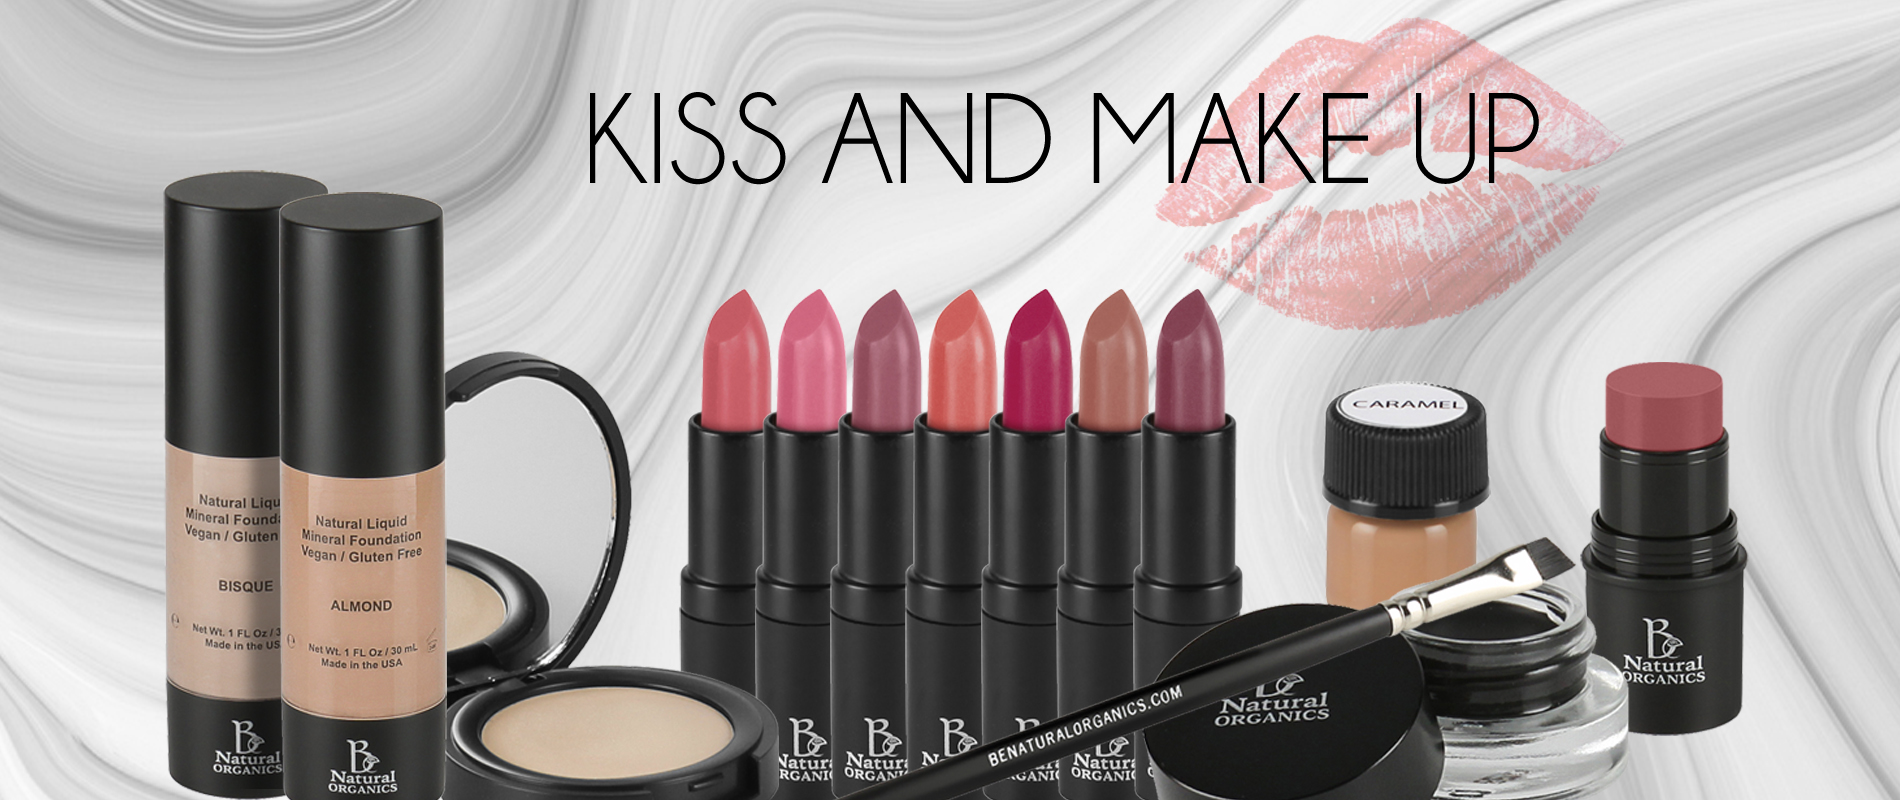 KISS AND MAKE UP 25%OFF slider 1900x800